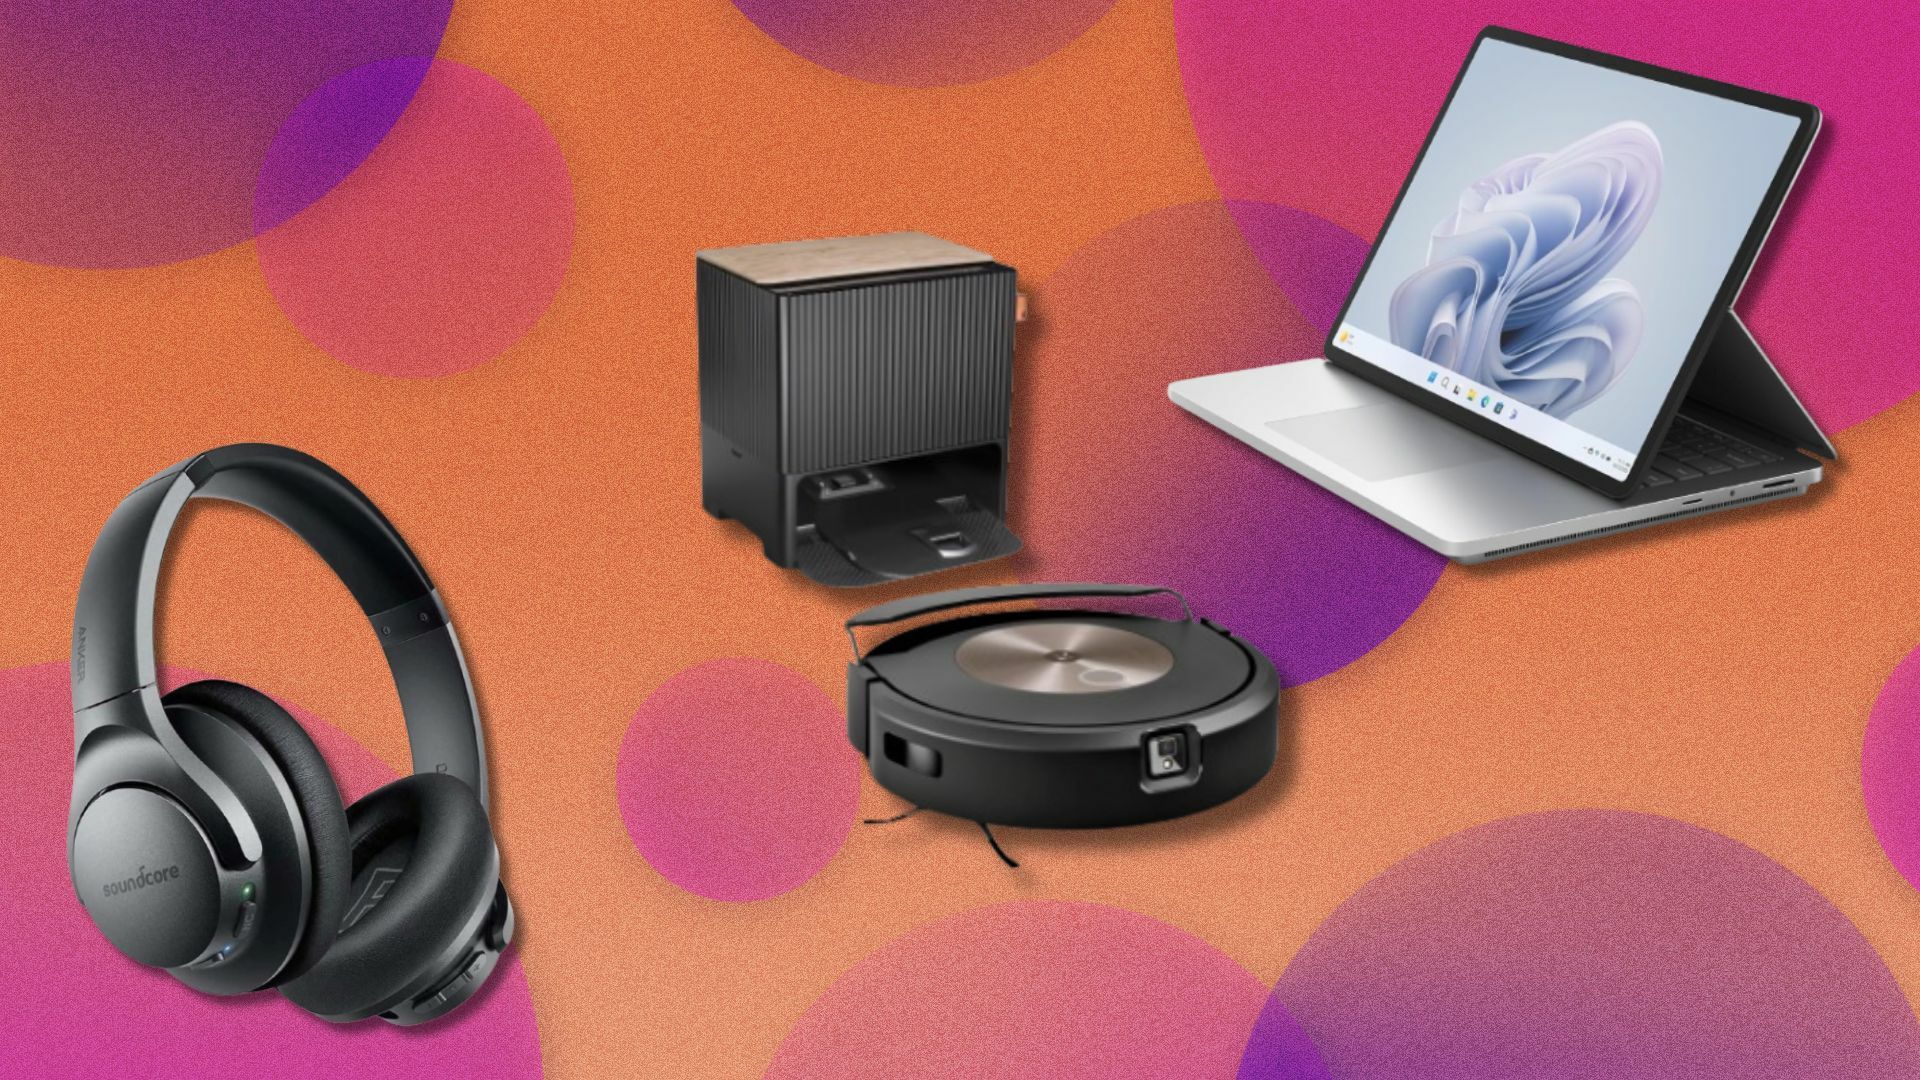 a pair of soundcore headphones, a iRobot roomba robot vacuum, and a microsoft surface laptop sit diagonally in a line on a pink background with orange and purple circles